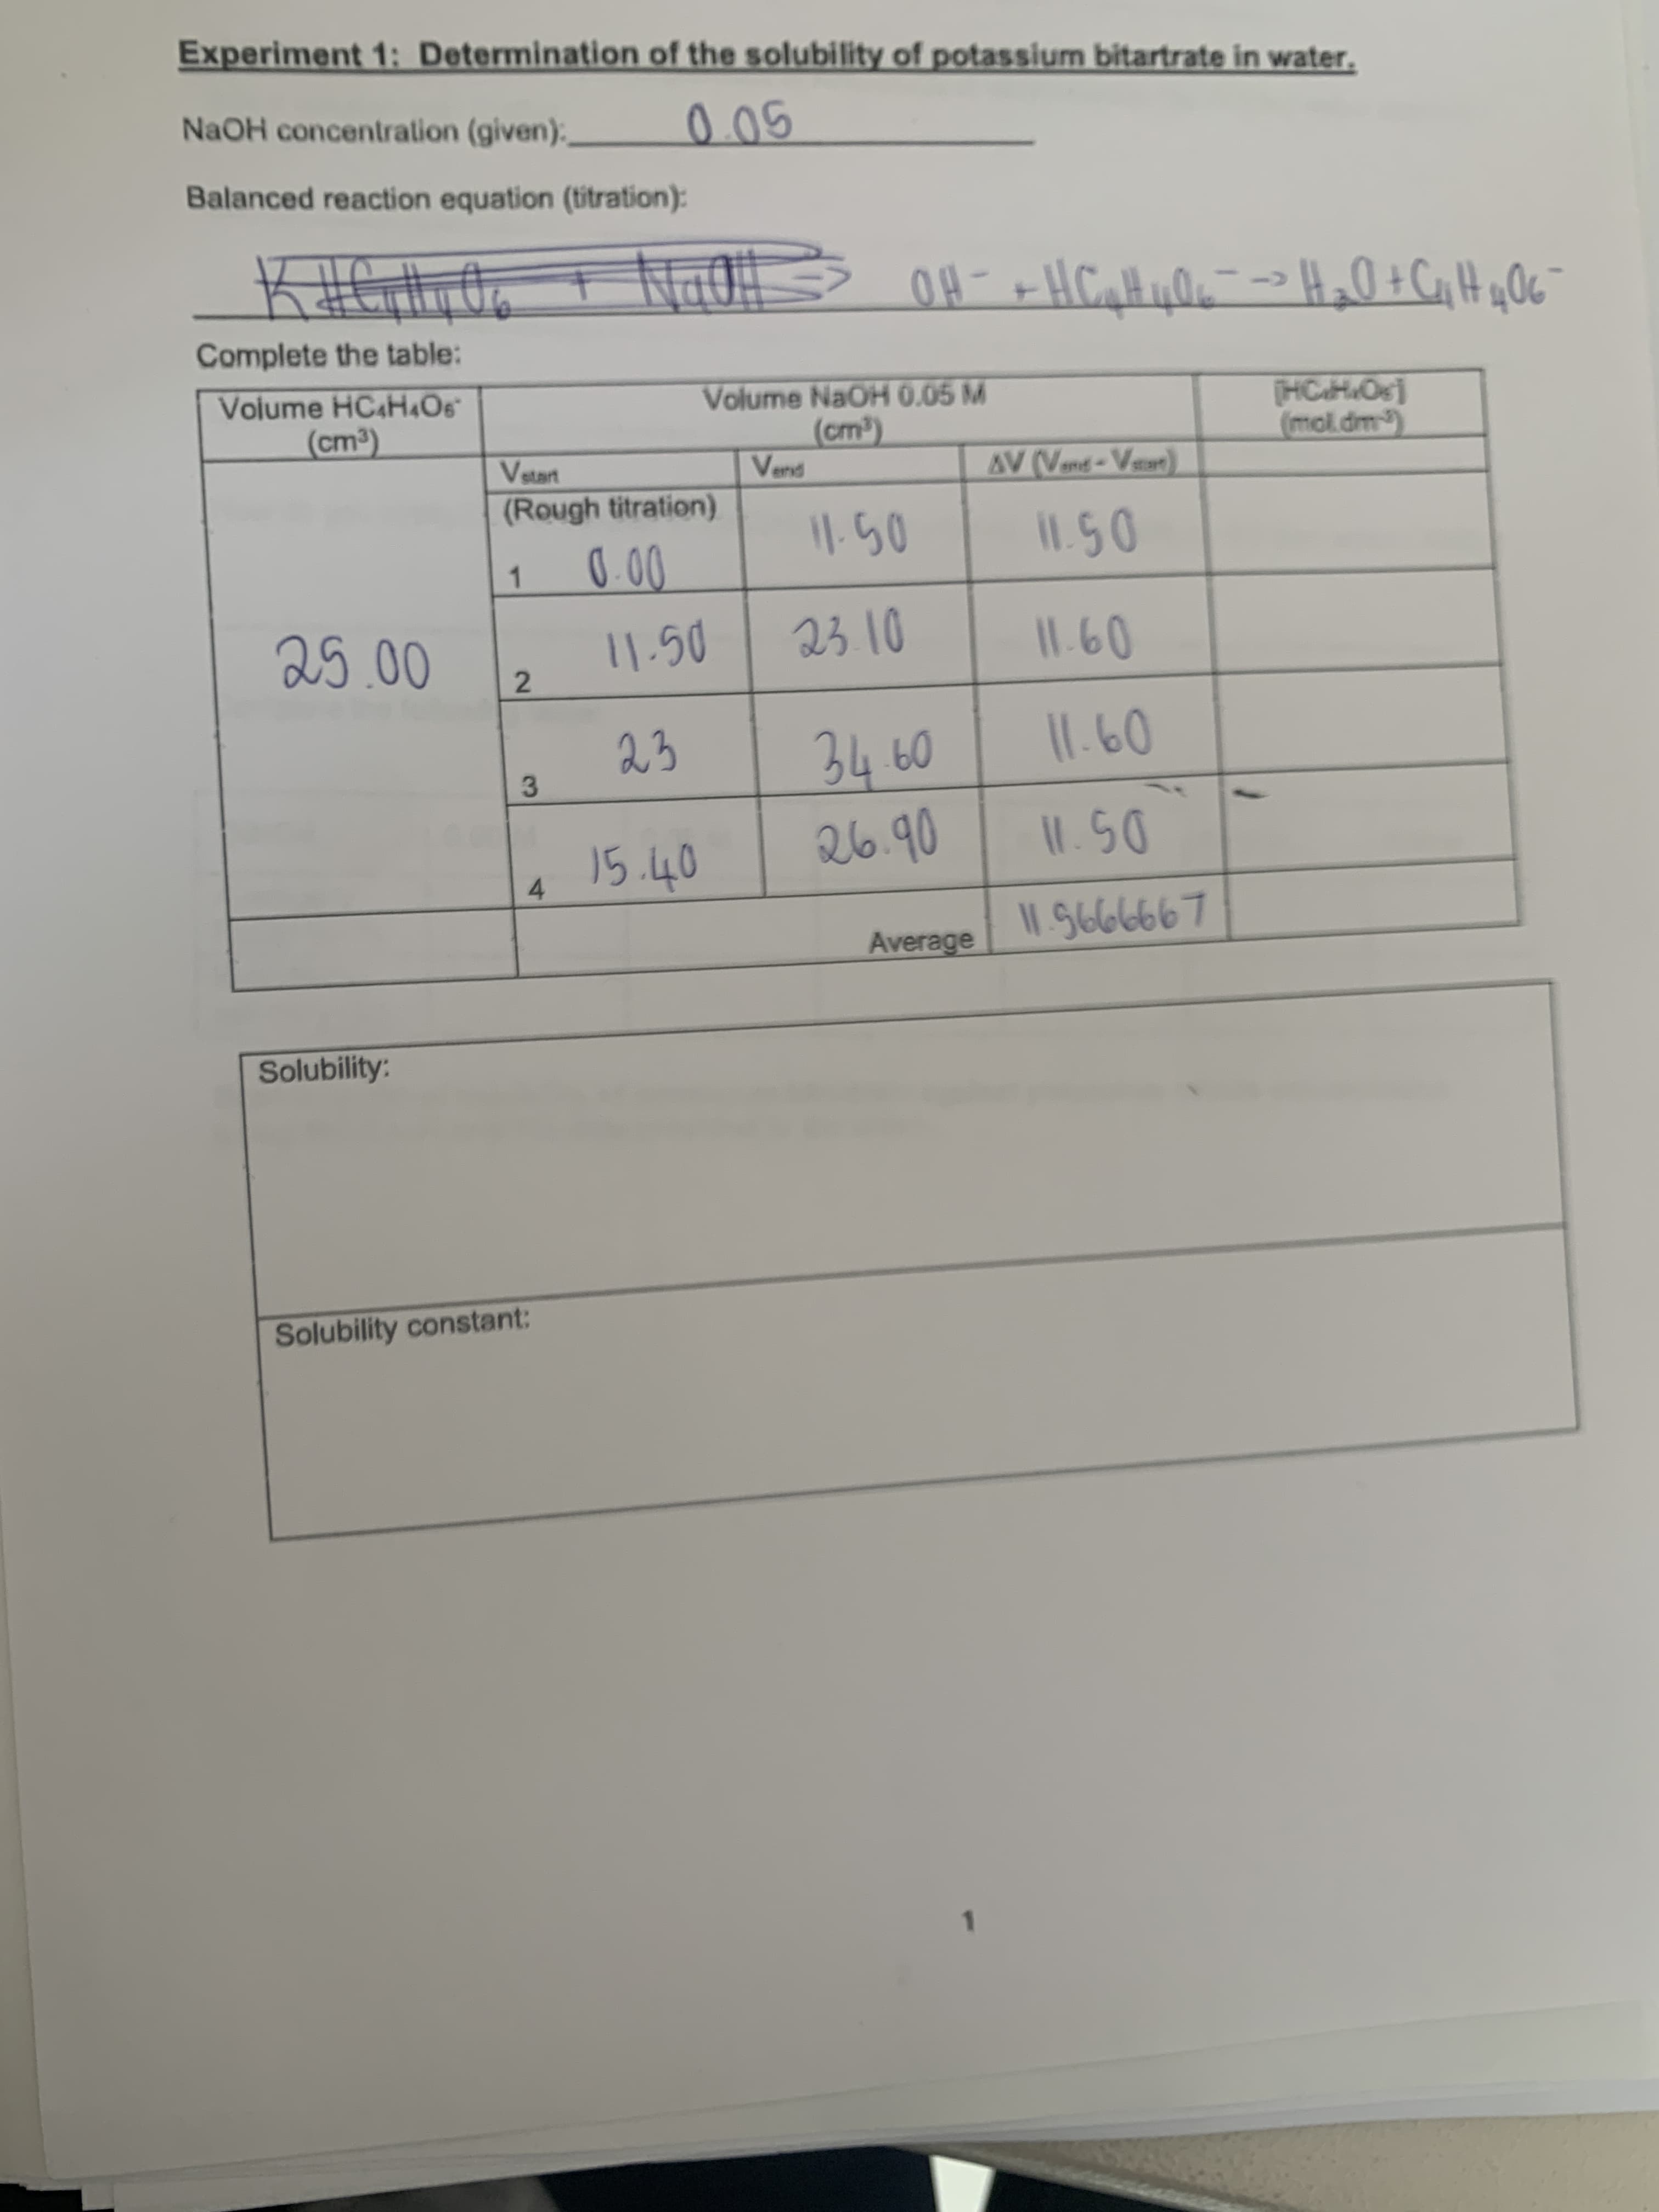 2.
Experiment 1: Determination of the solubility of potassium bitartrate in water.
NaOH concentration (given):
Balanced reaction equation (titration):
HO
Complete the table:
Volume NaOH 0.05 M
LOHOH
Volume HC&H.Os"
(cm3)
(mol.dm3)
AV Vend-
Vean)
Vstart
(Rough titration)
1.
23
09 79
3.
4.
Average
L999996 |
Solubility:
Solubility constant:
1.
